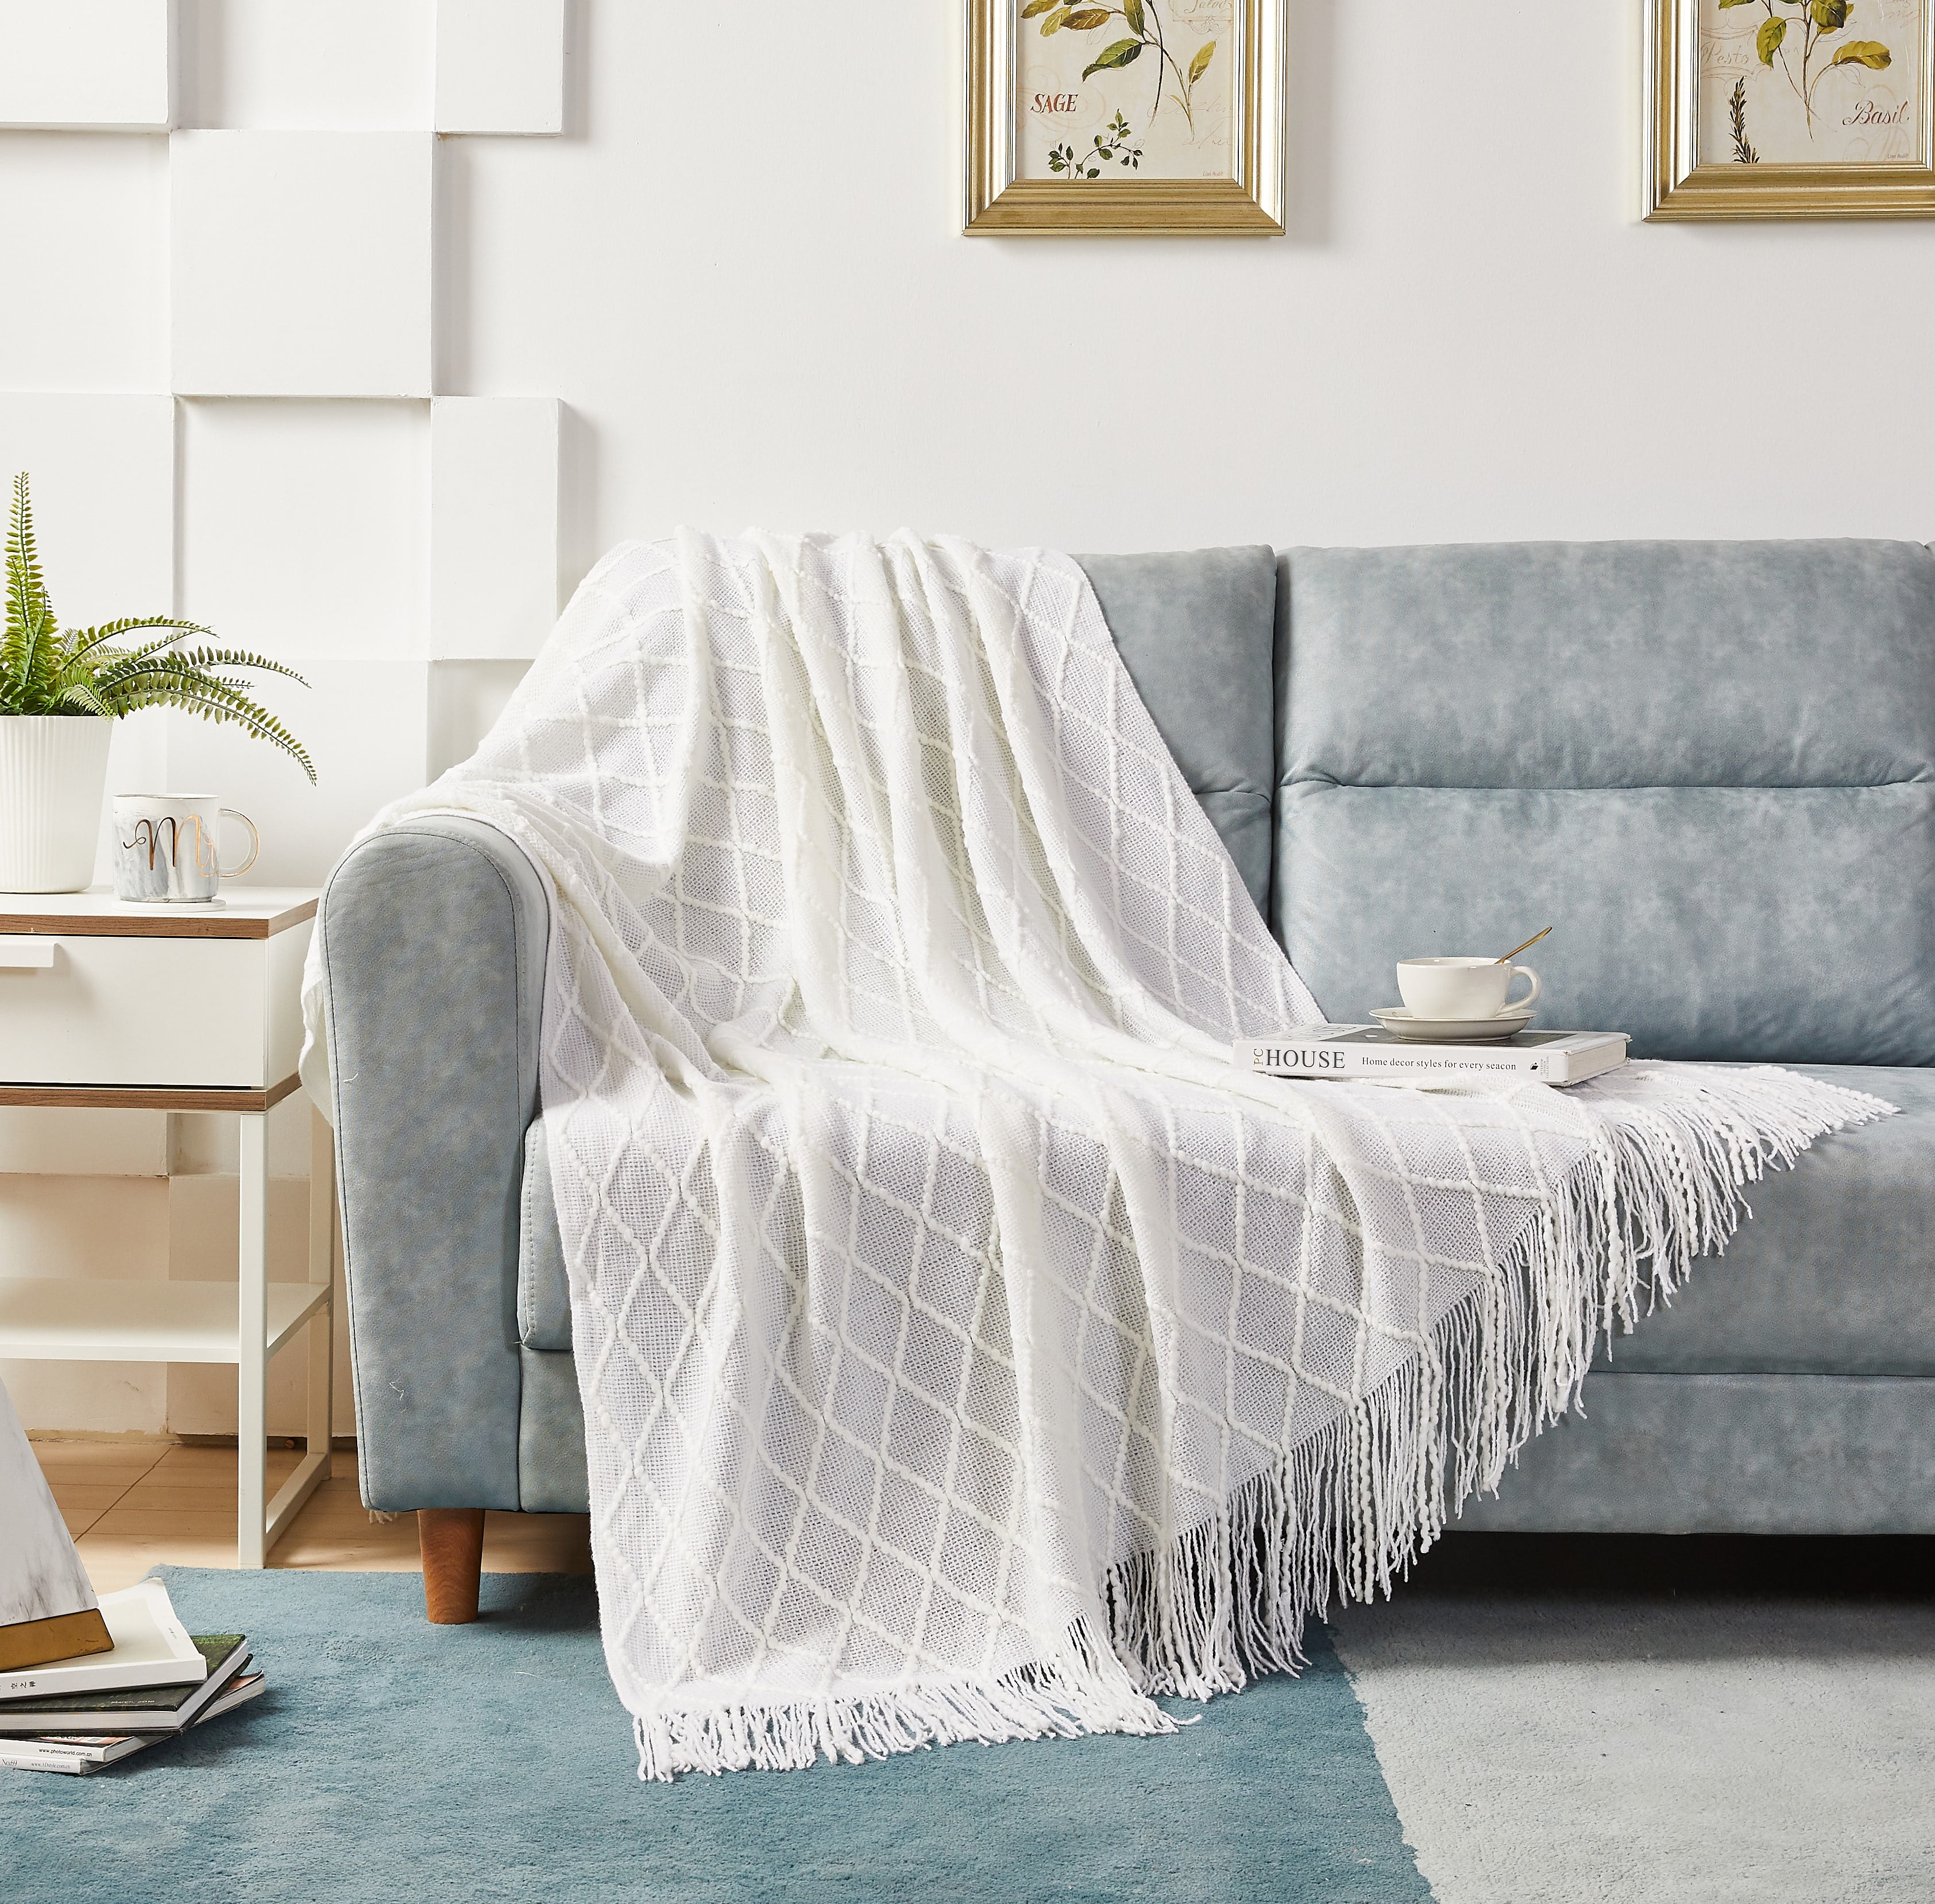 Decorative Fringe Throw Blanket for Couch Bed Sofa Knit Woven Blanket 50"×60" 